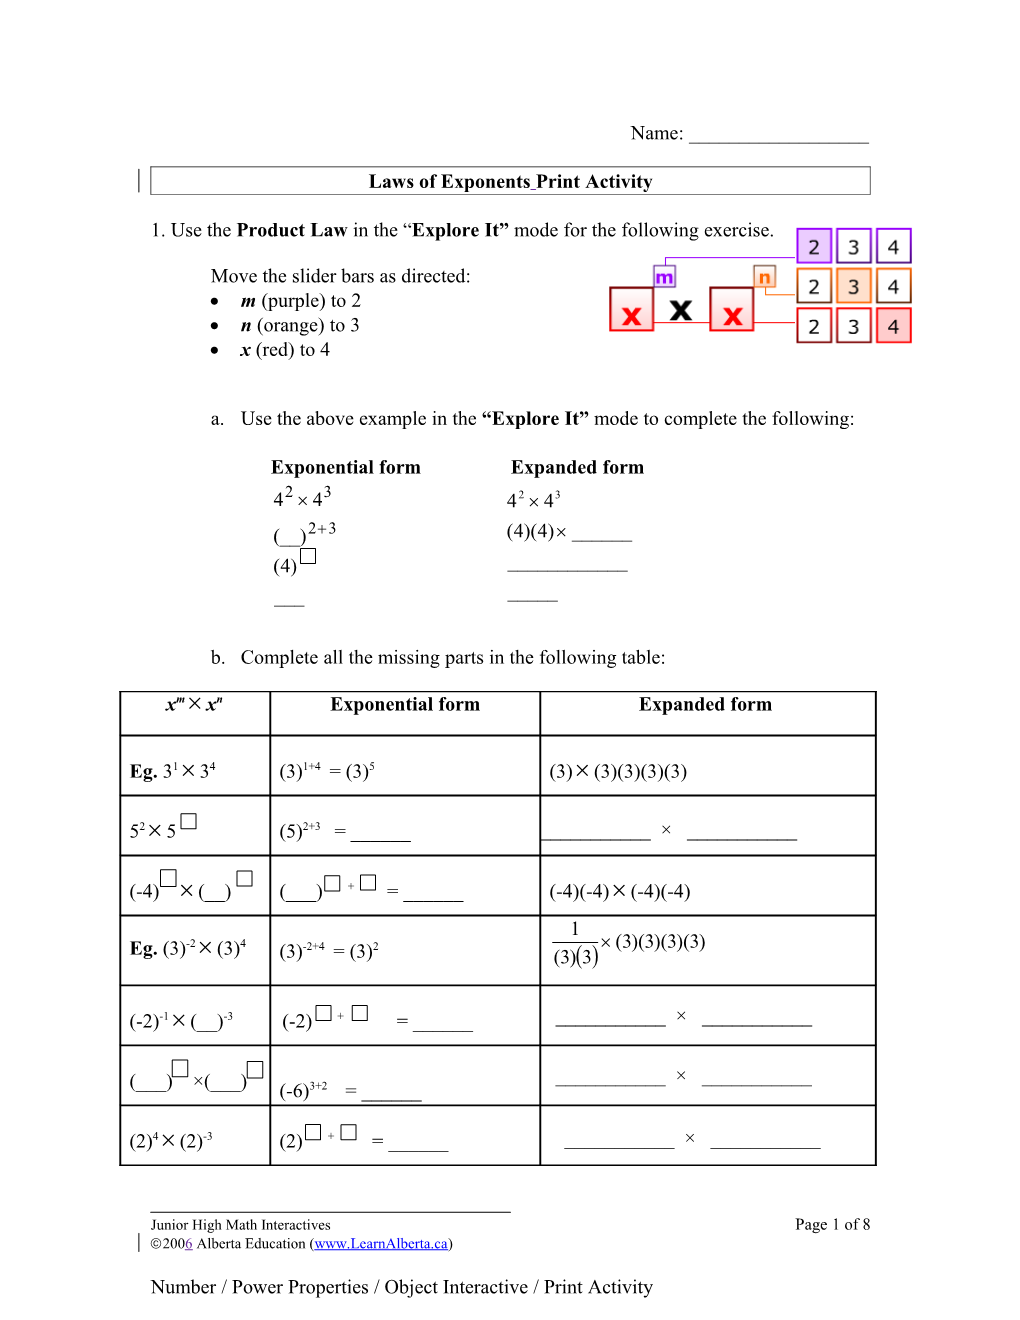 Laws of Exponents Print Activity